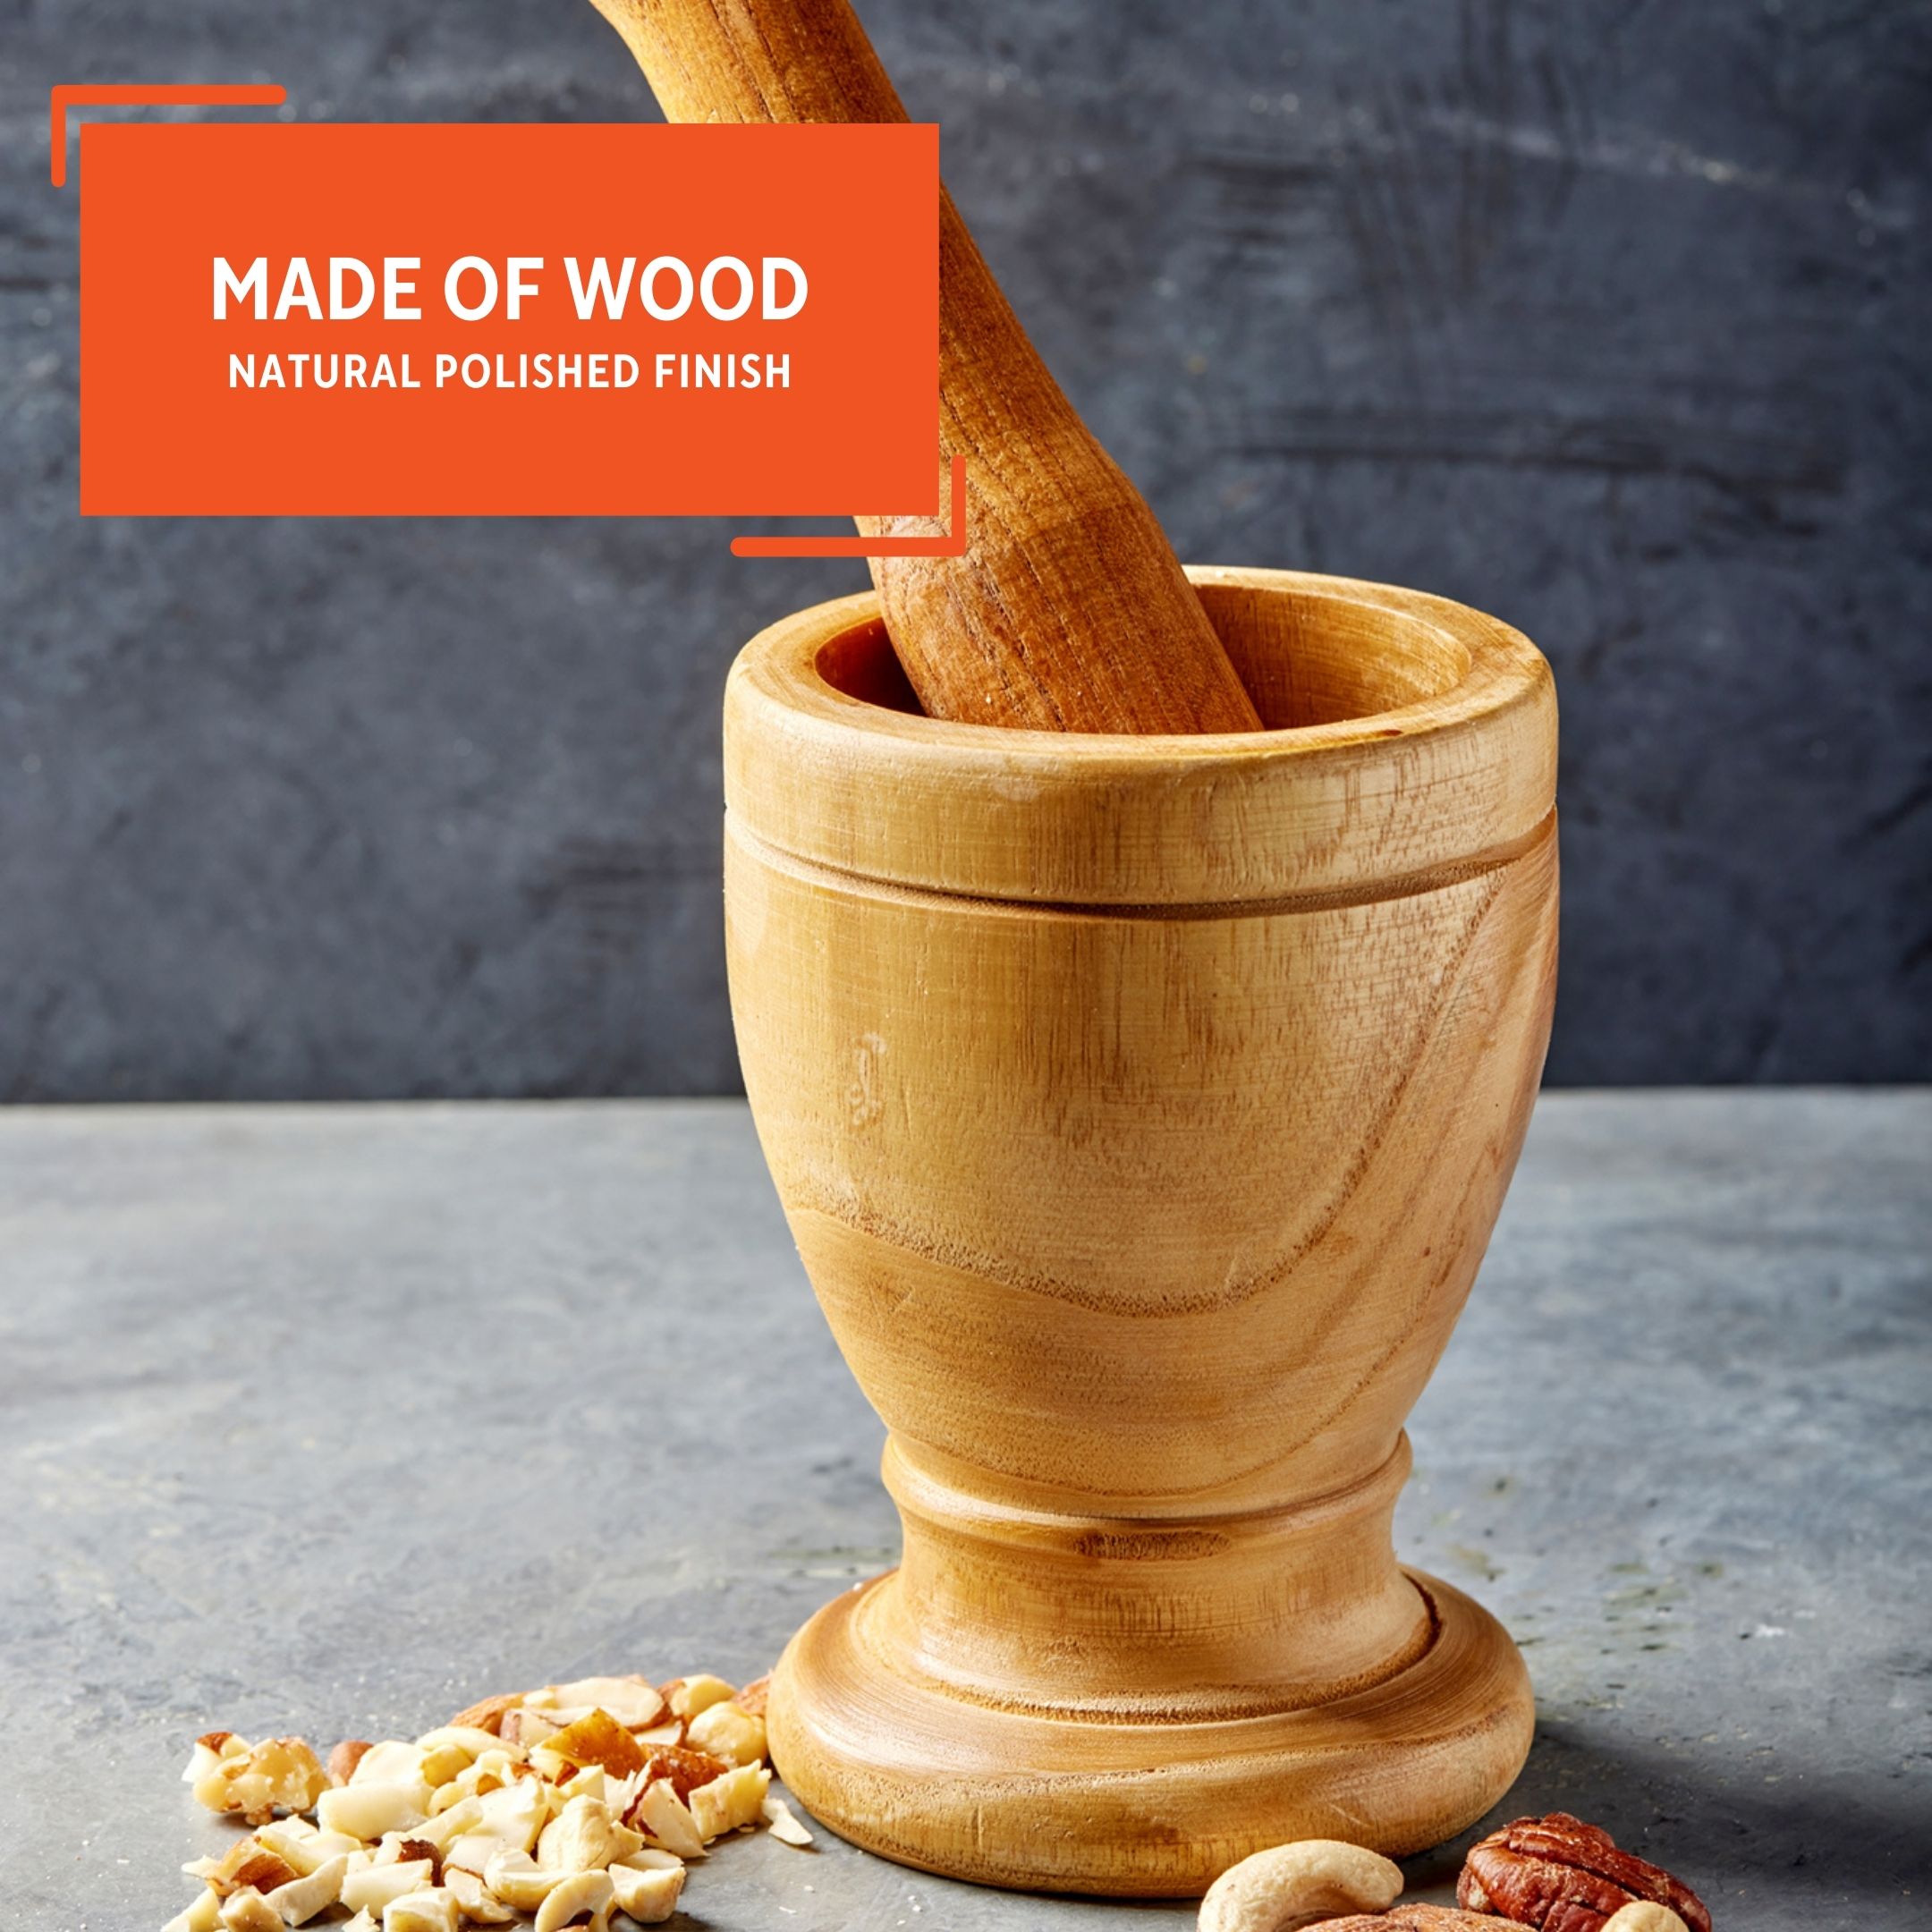 Imusa Small Traditional Wood Mortar and Pestle, Beige - image 4 of 11